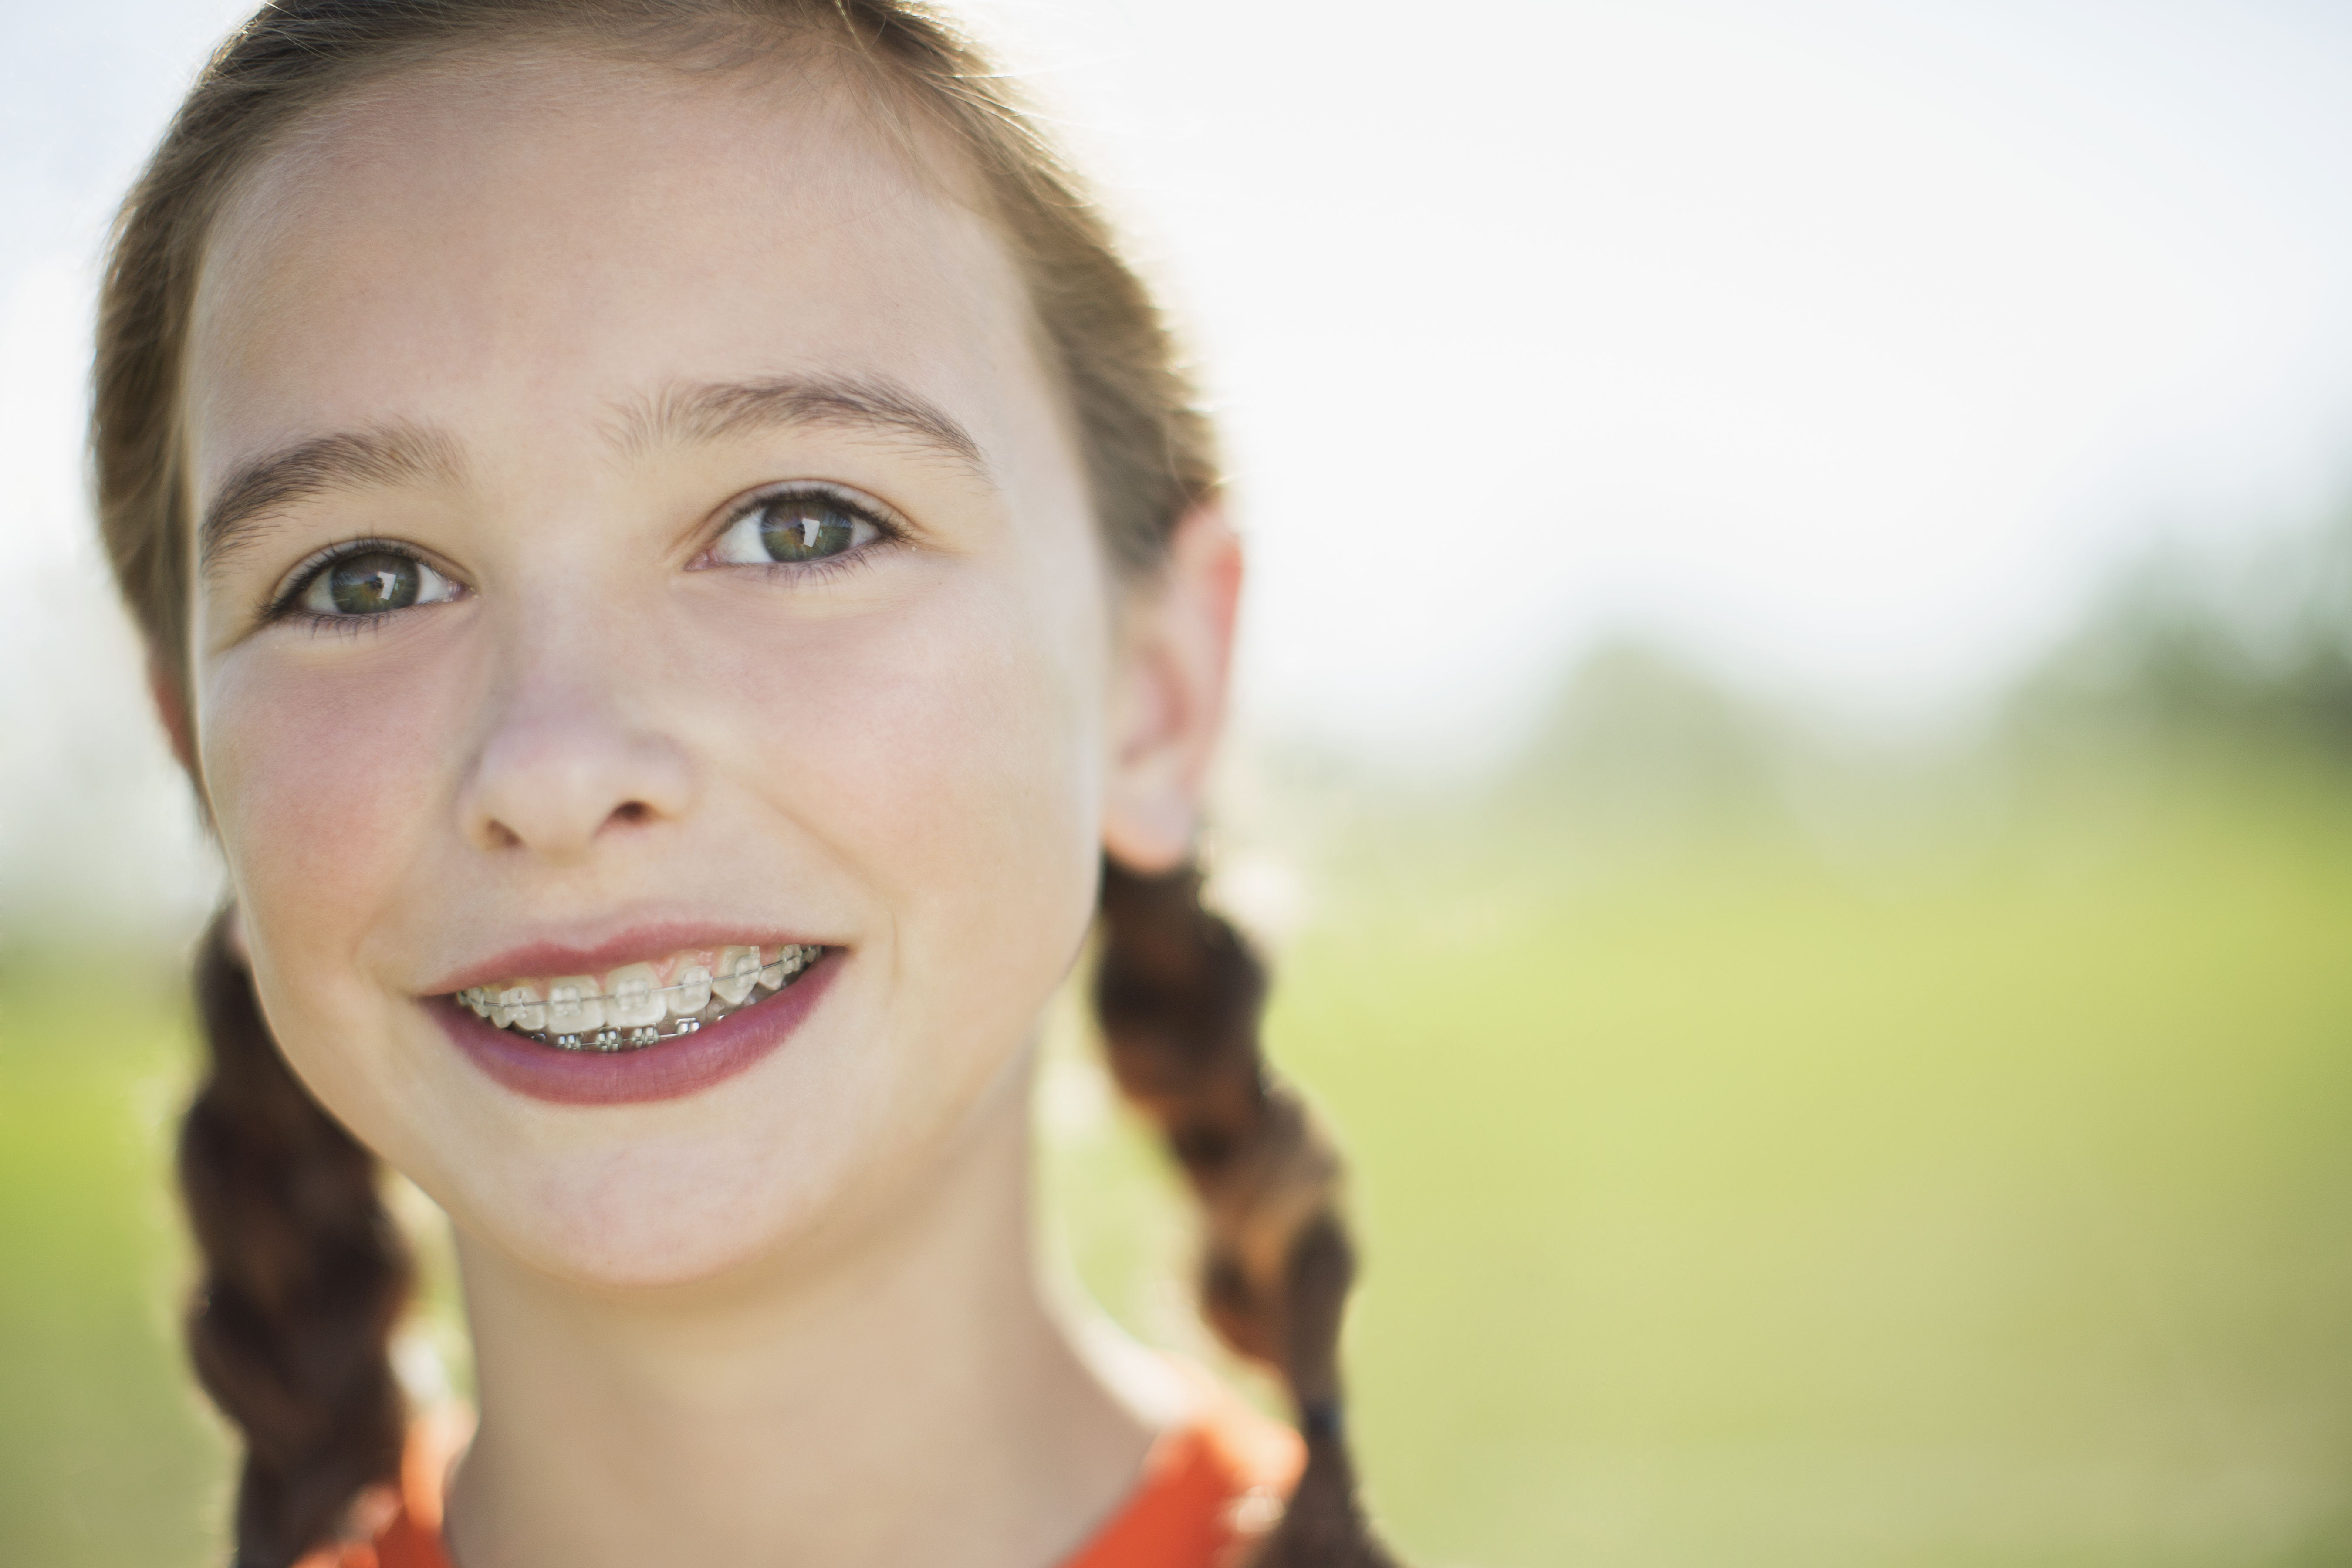 how to use a waterpik - Portrait of female soccer player with pigtails and braces.